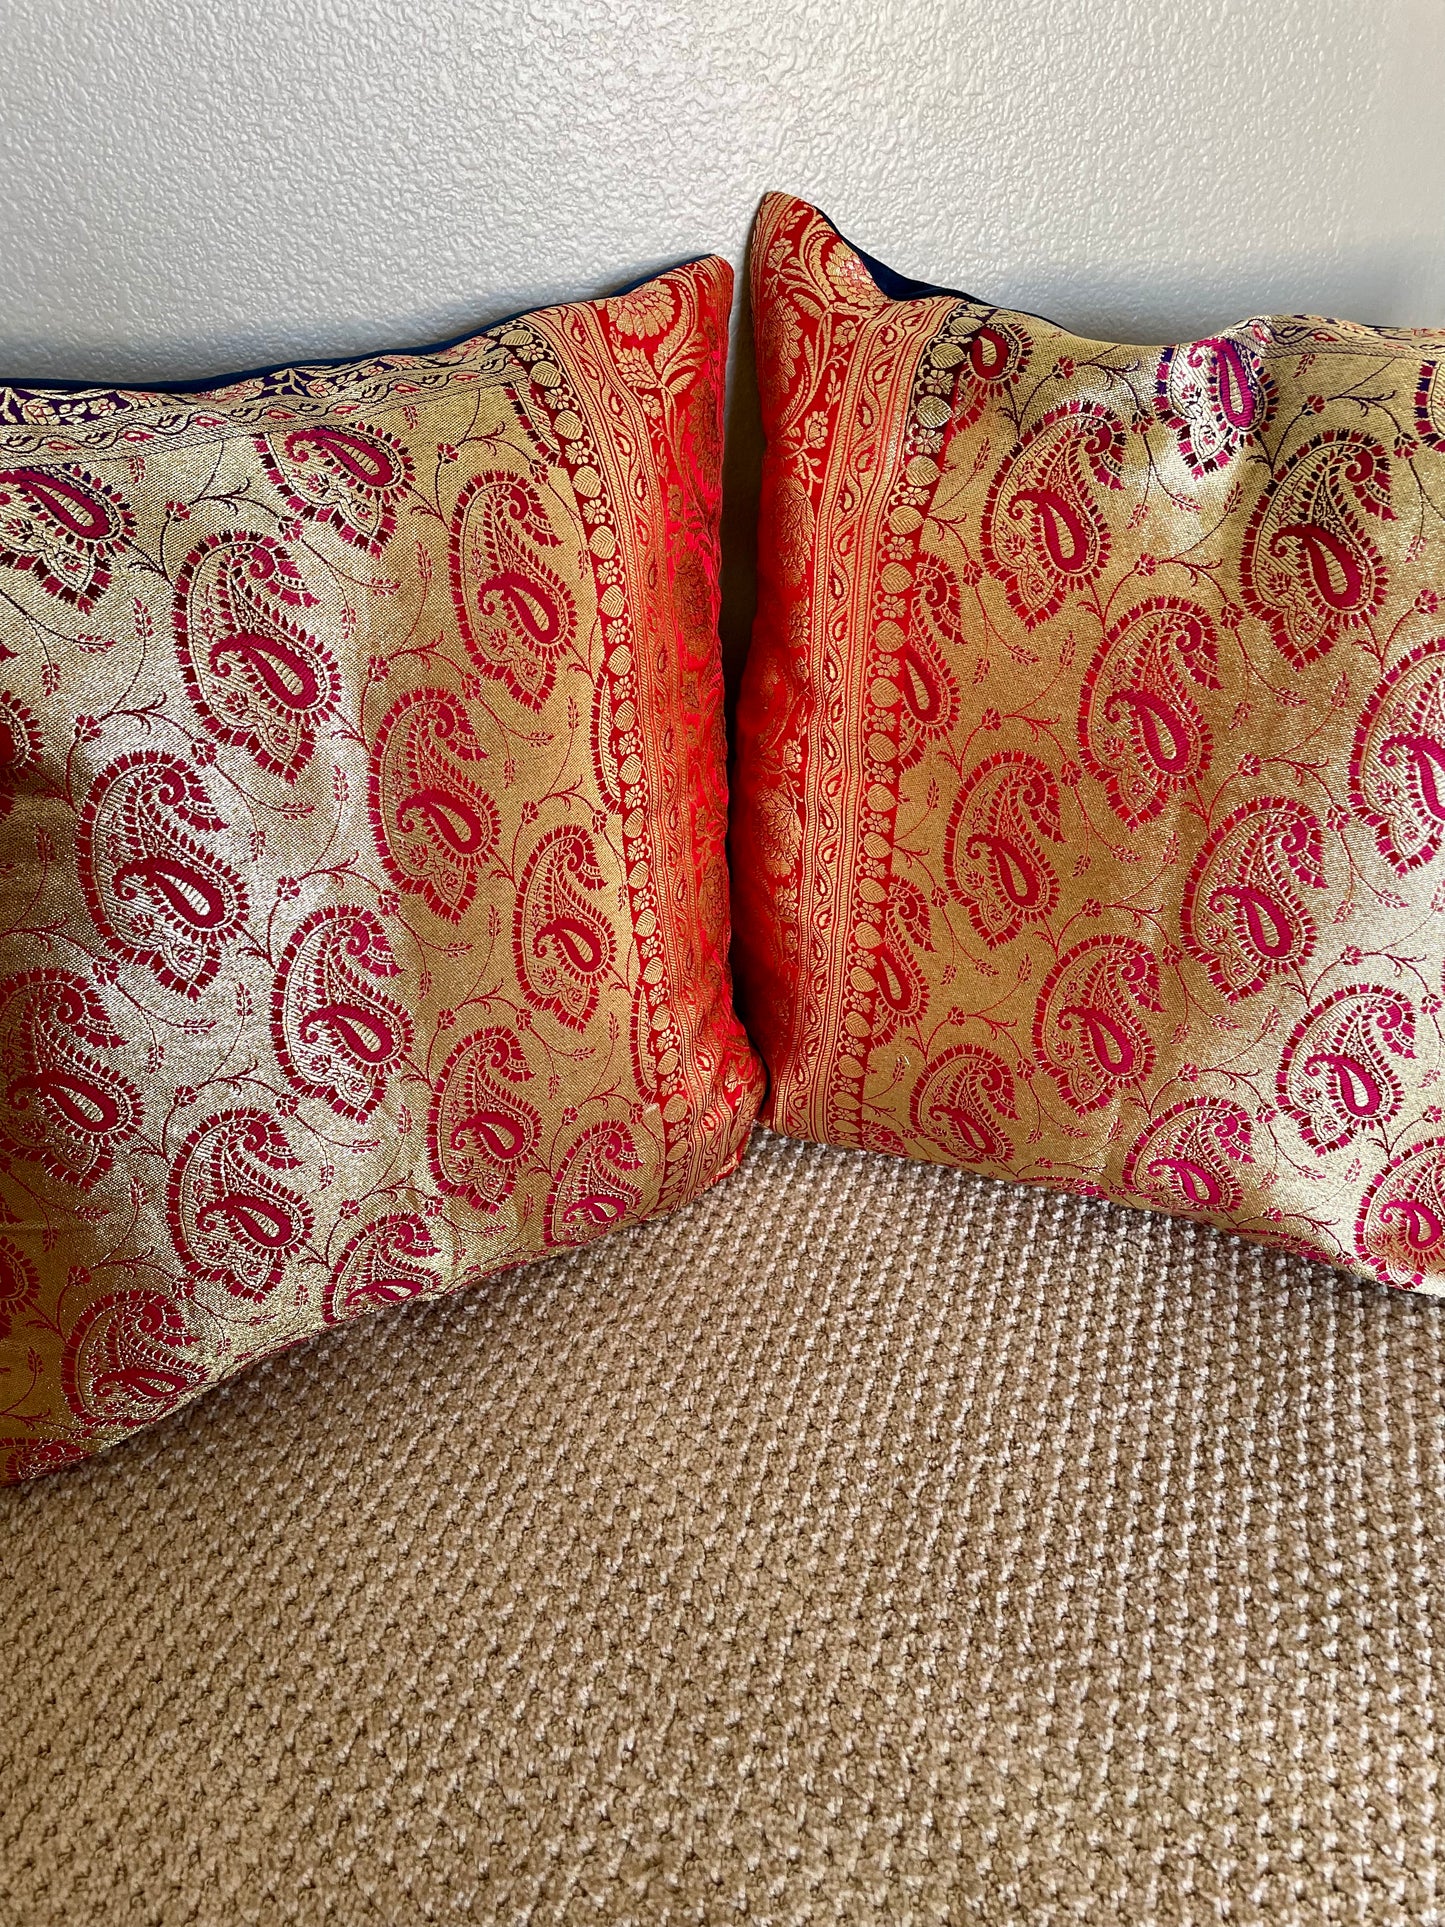 Royal Blue and Red Cushions